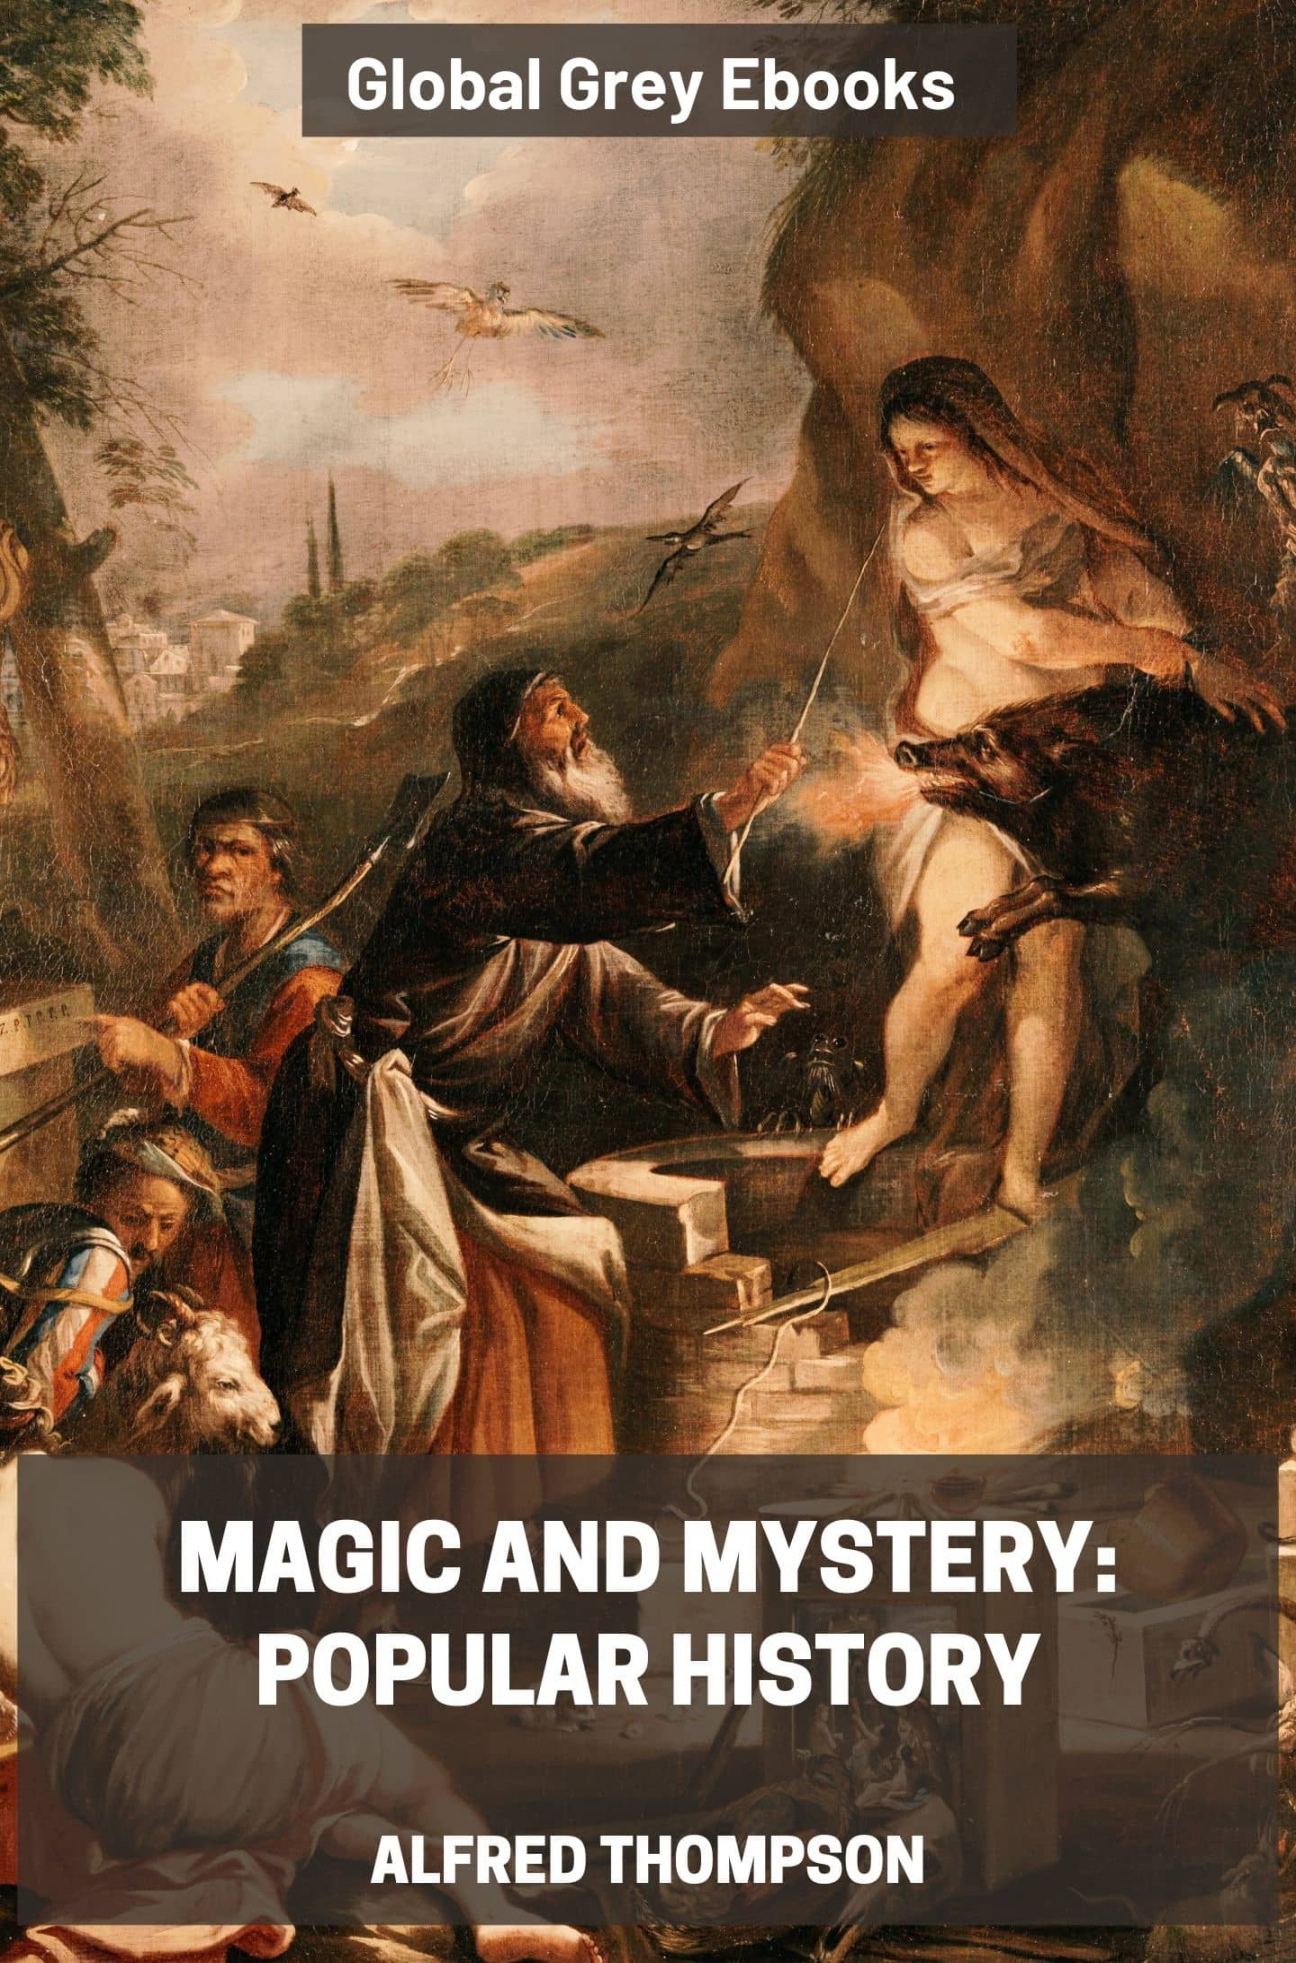 Magic and Mystery: Popular History by Alfred Thompson - Complete